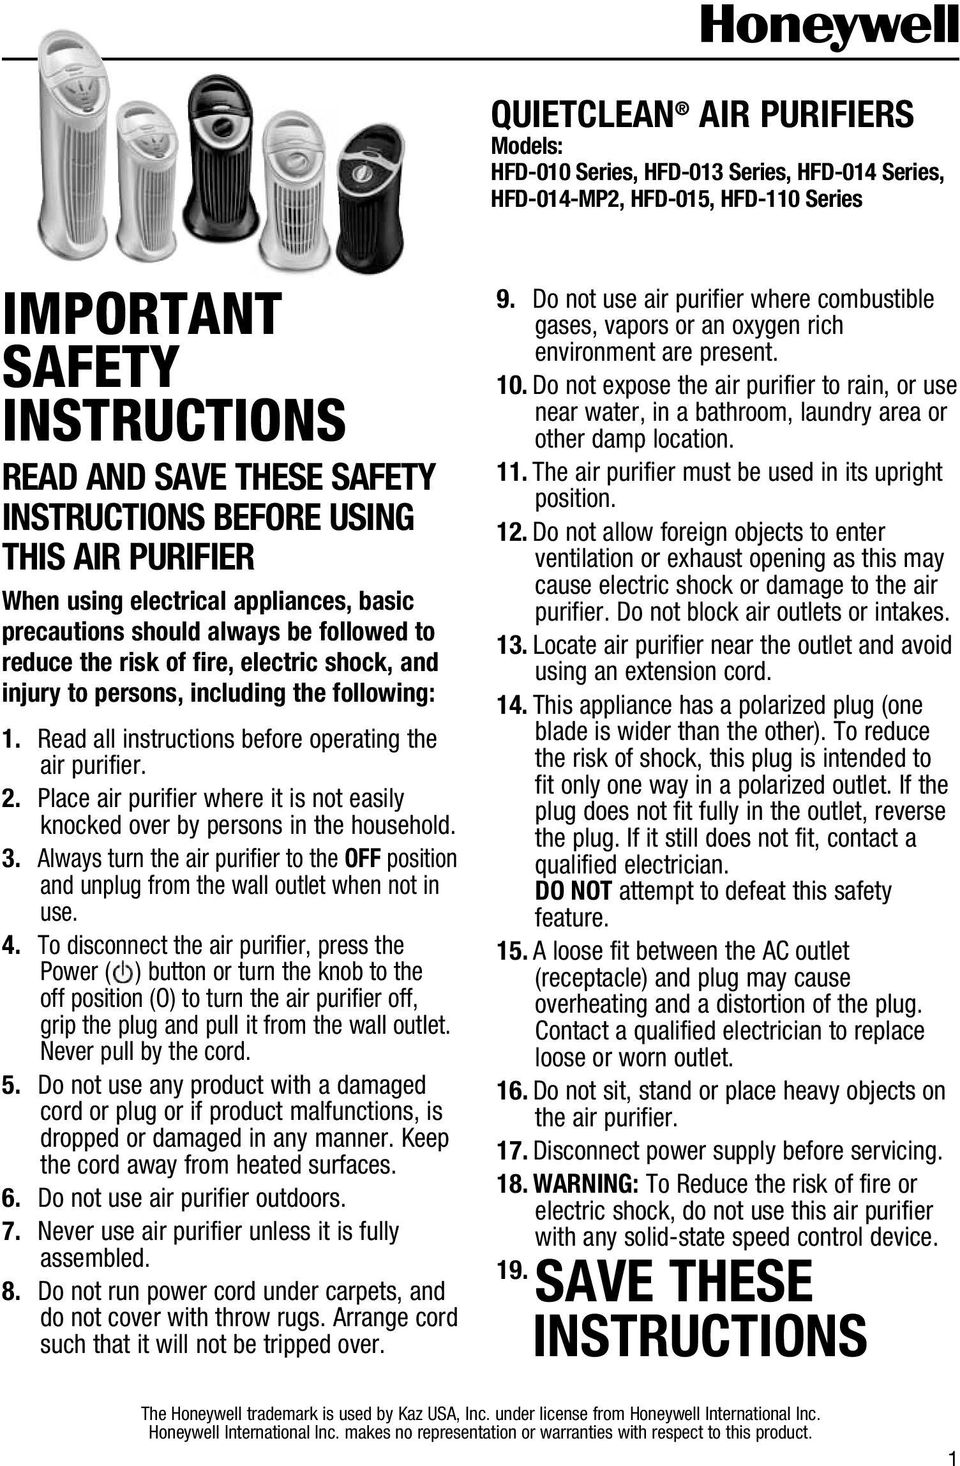 Read all instructions before operating the air purifier. 2. Place air purifier where it is not easily knocked over by persons in the household. 3.